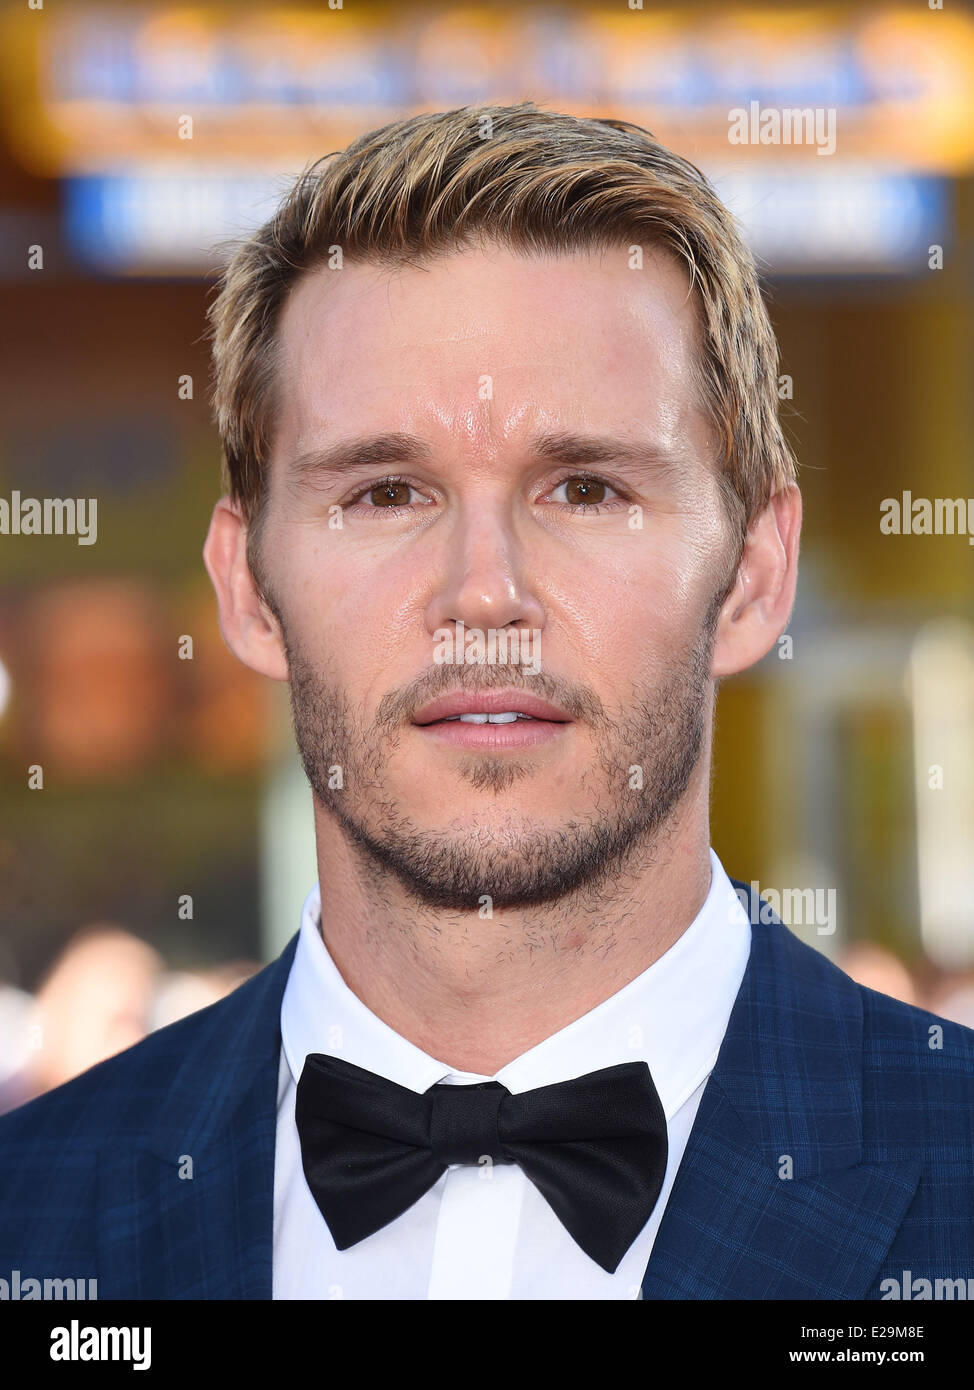 Hollywood, California, USA. 17th June, 2014. Ryan Kwanten arrives for the premiere of the HBO's 'True Blood' at the Chinese theater. Credit:  Lisa O'Connor/ZUMAPRESS.com/Alamy Live News Stock Photo